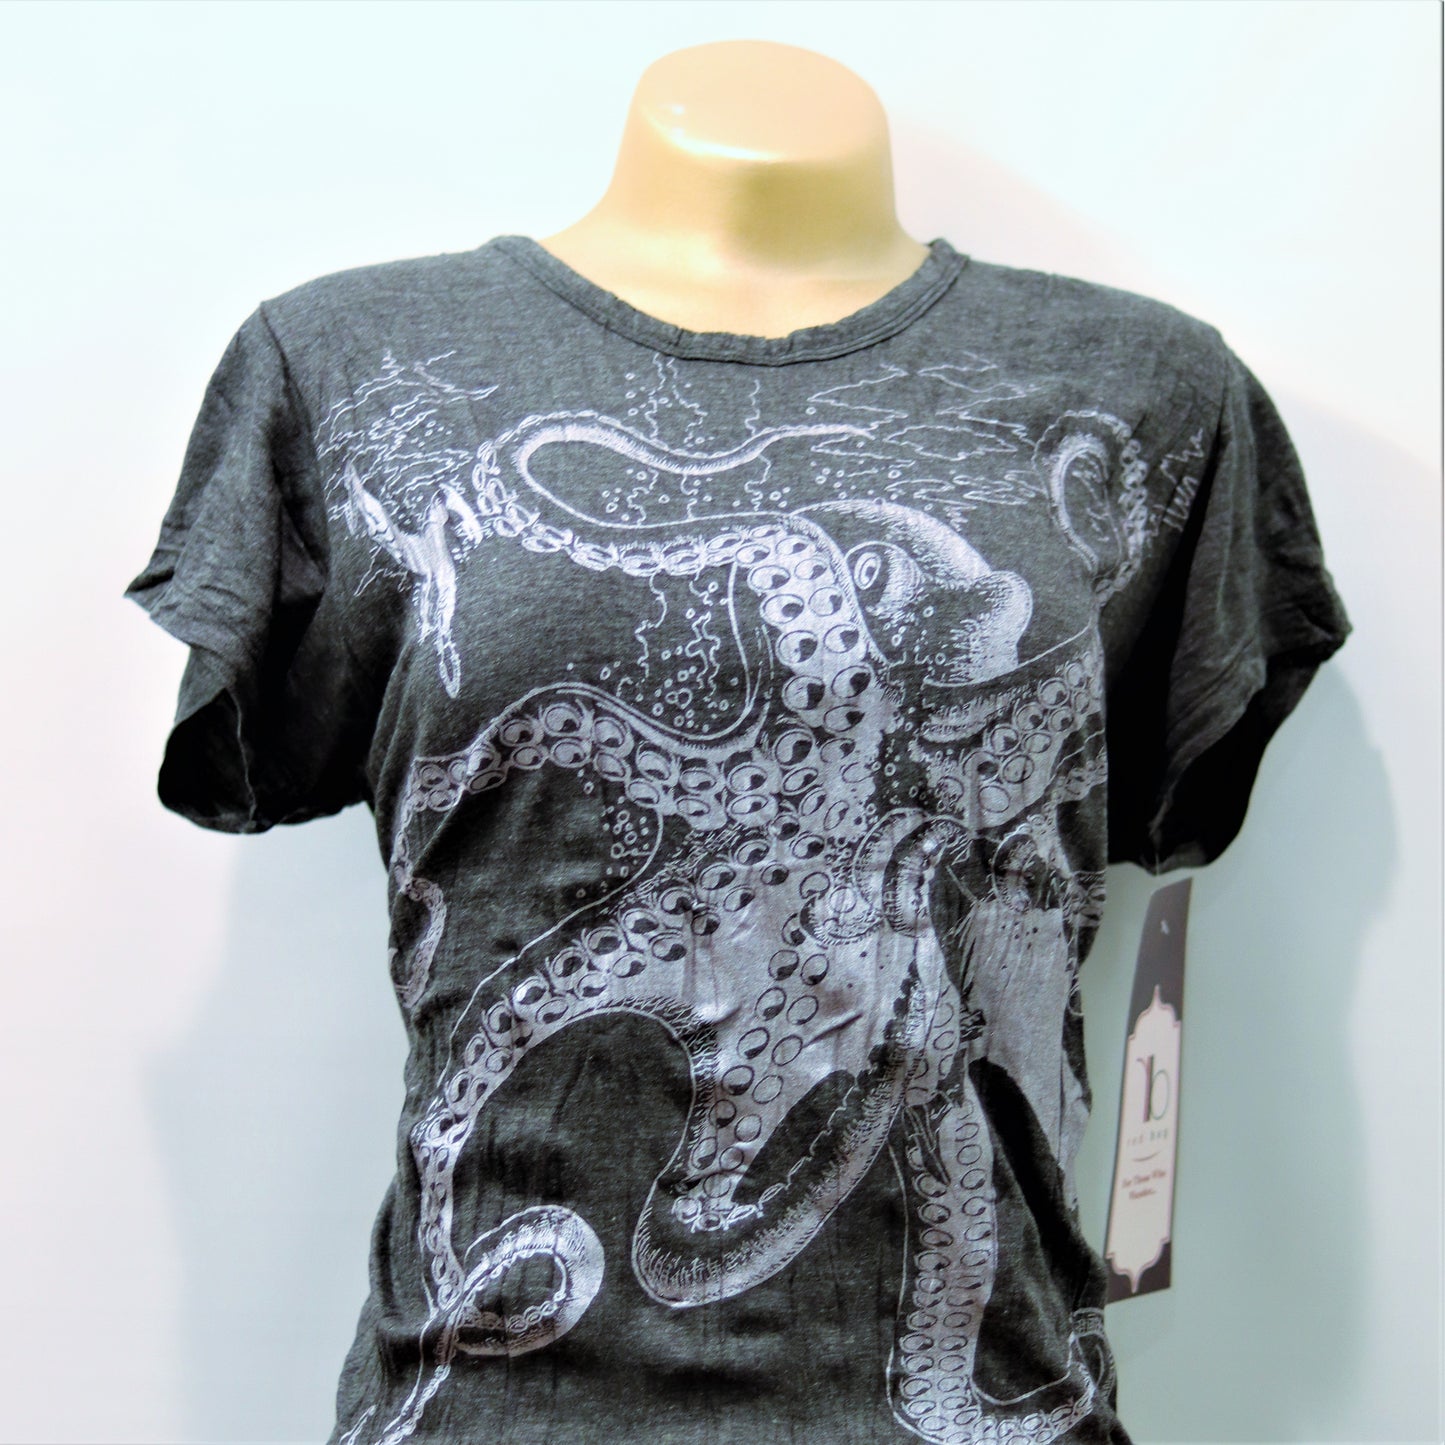 Octopus Attack Women's T by Sure